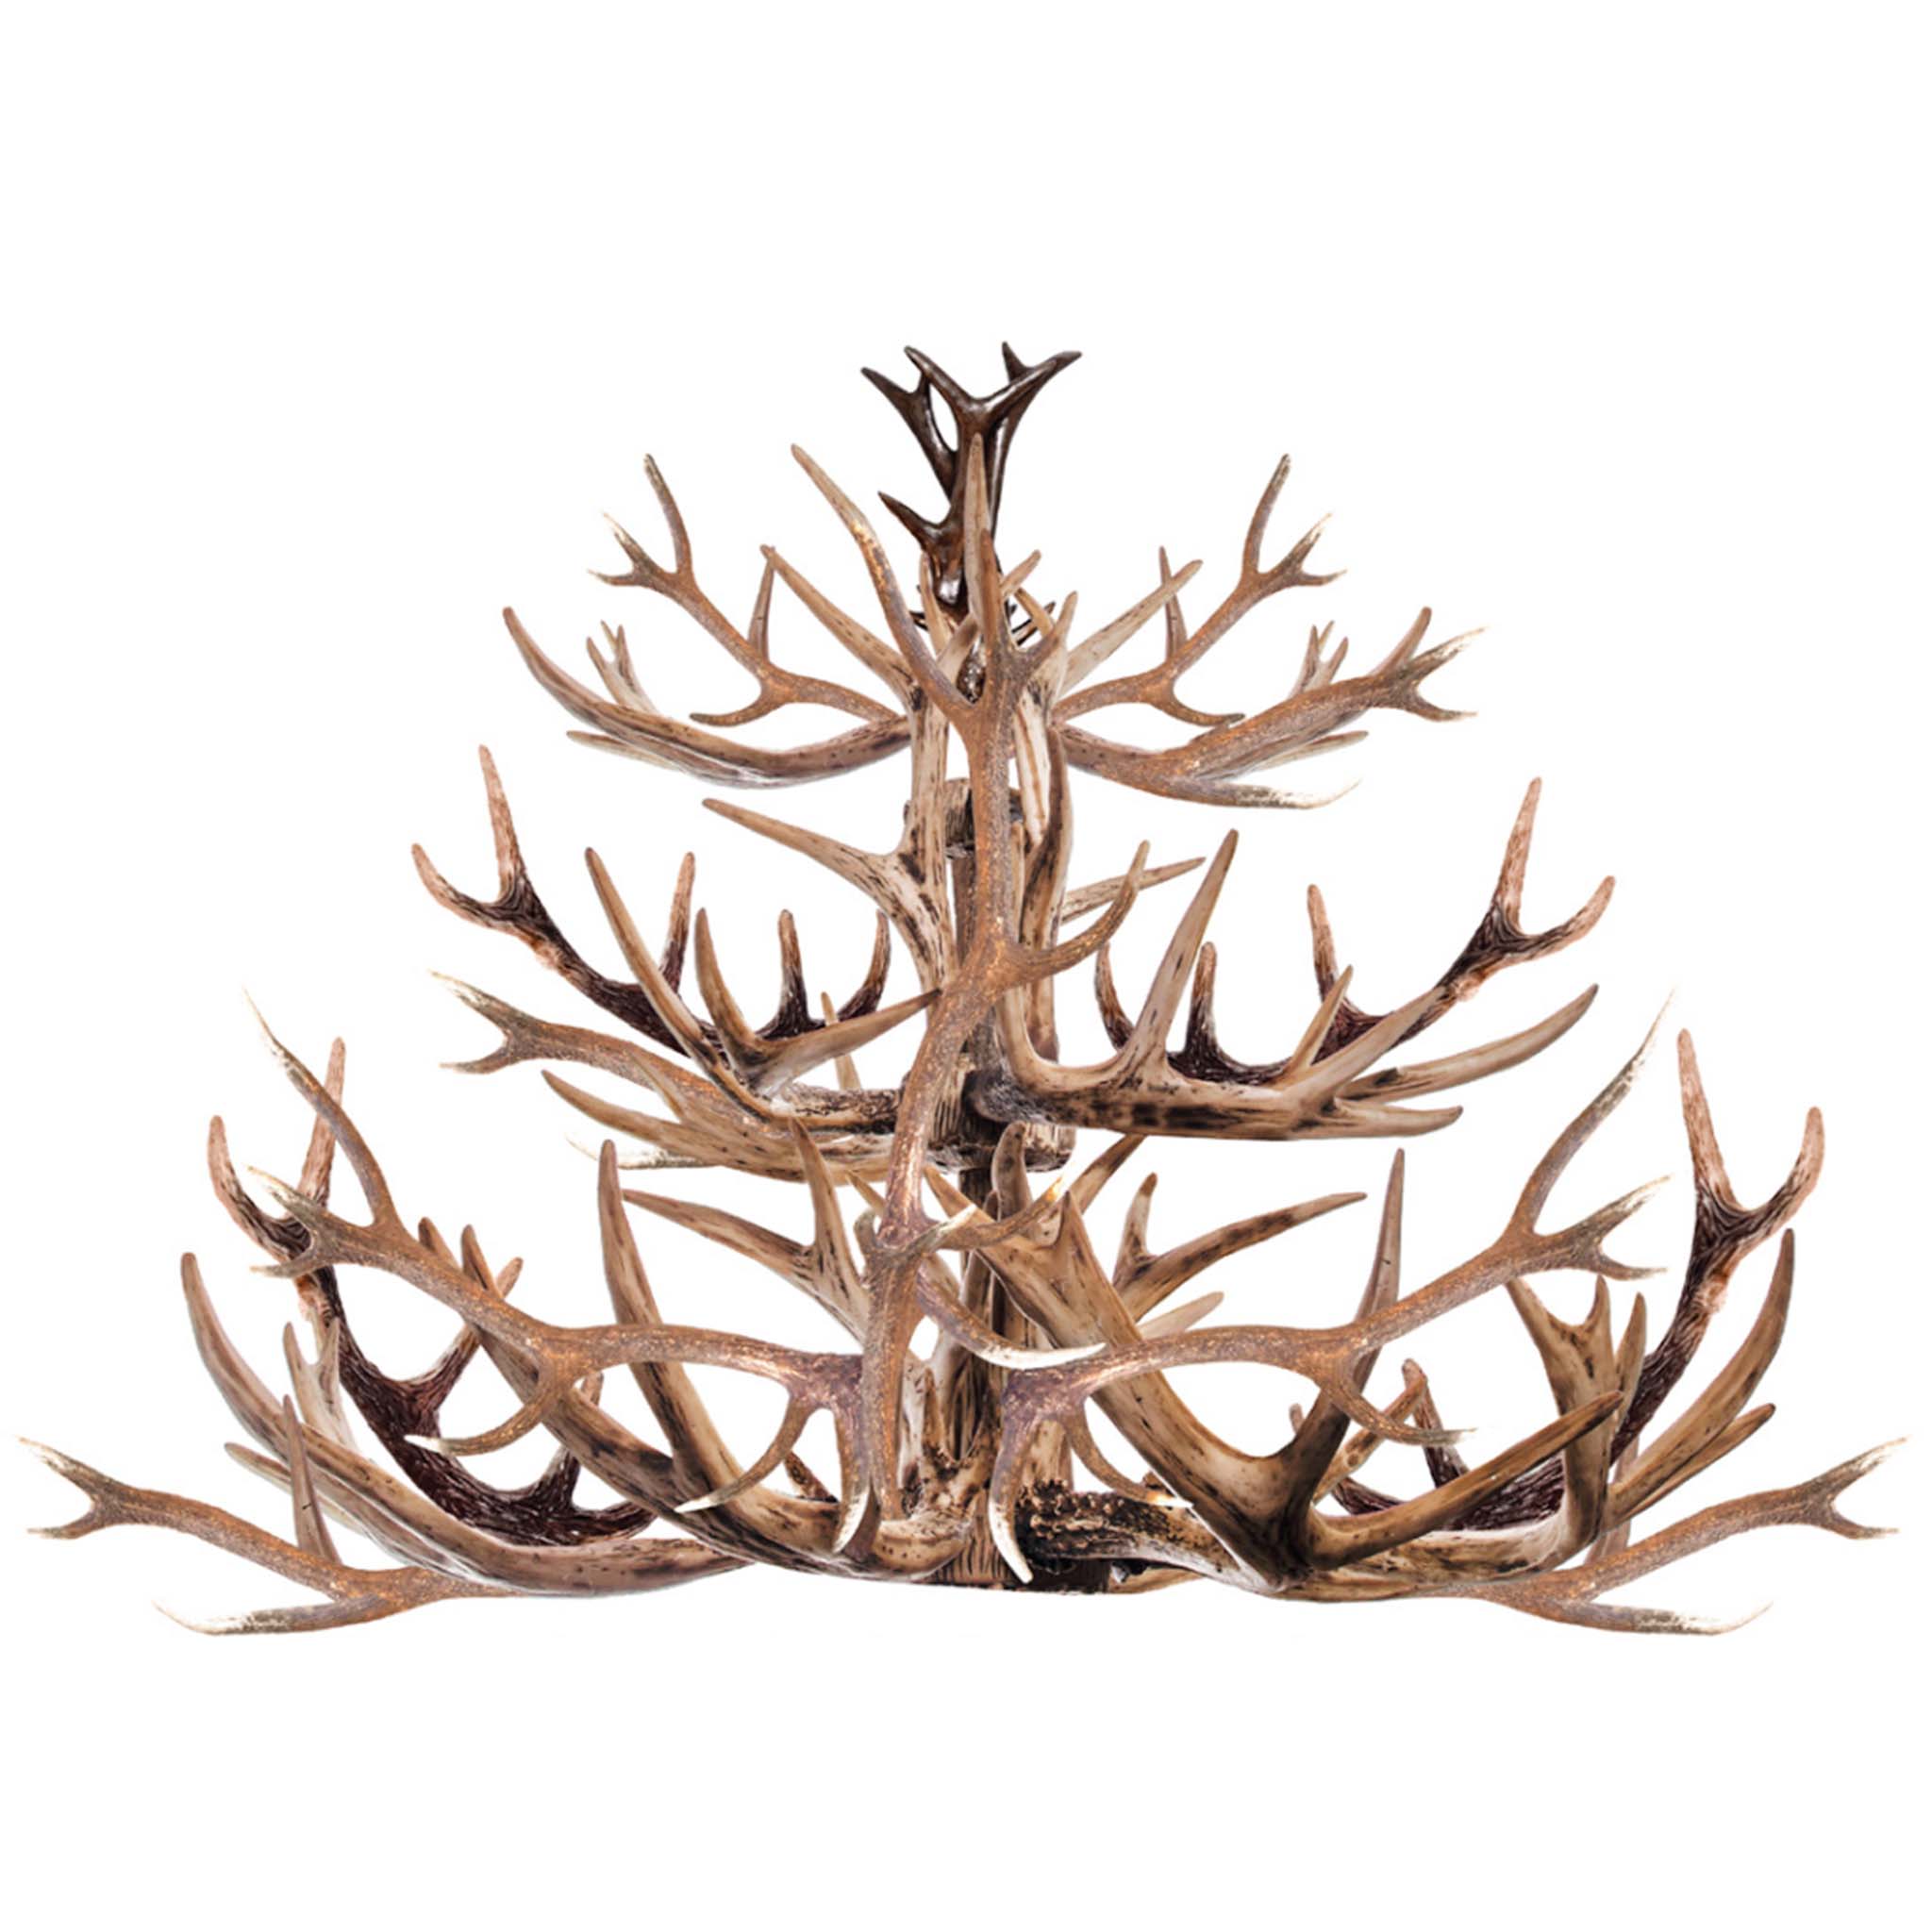 Rub-on transfer design against a white background of deer antlers fashioned into a chandelier. 